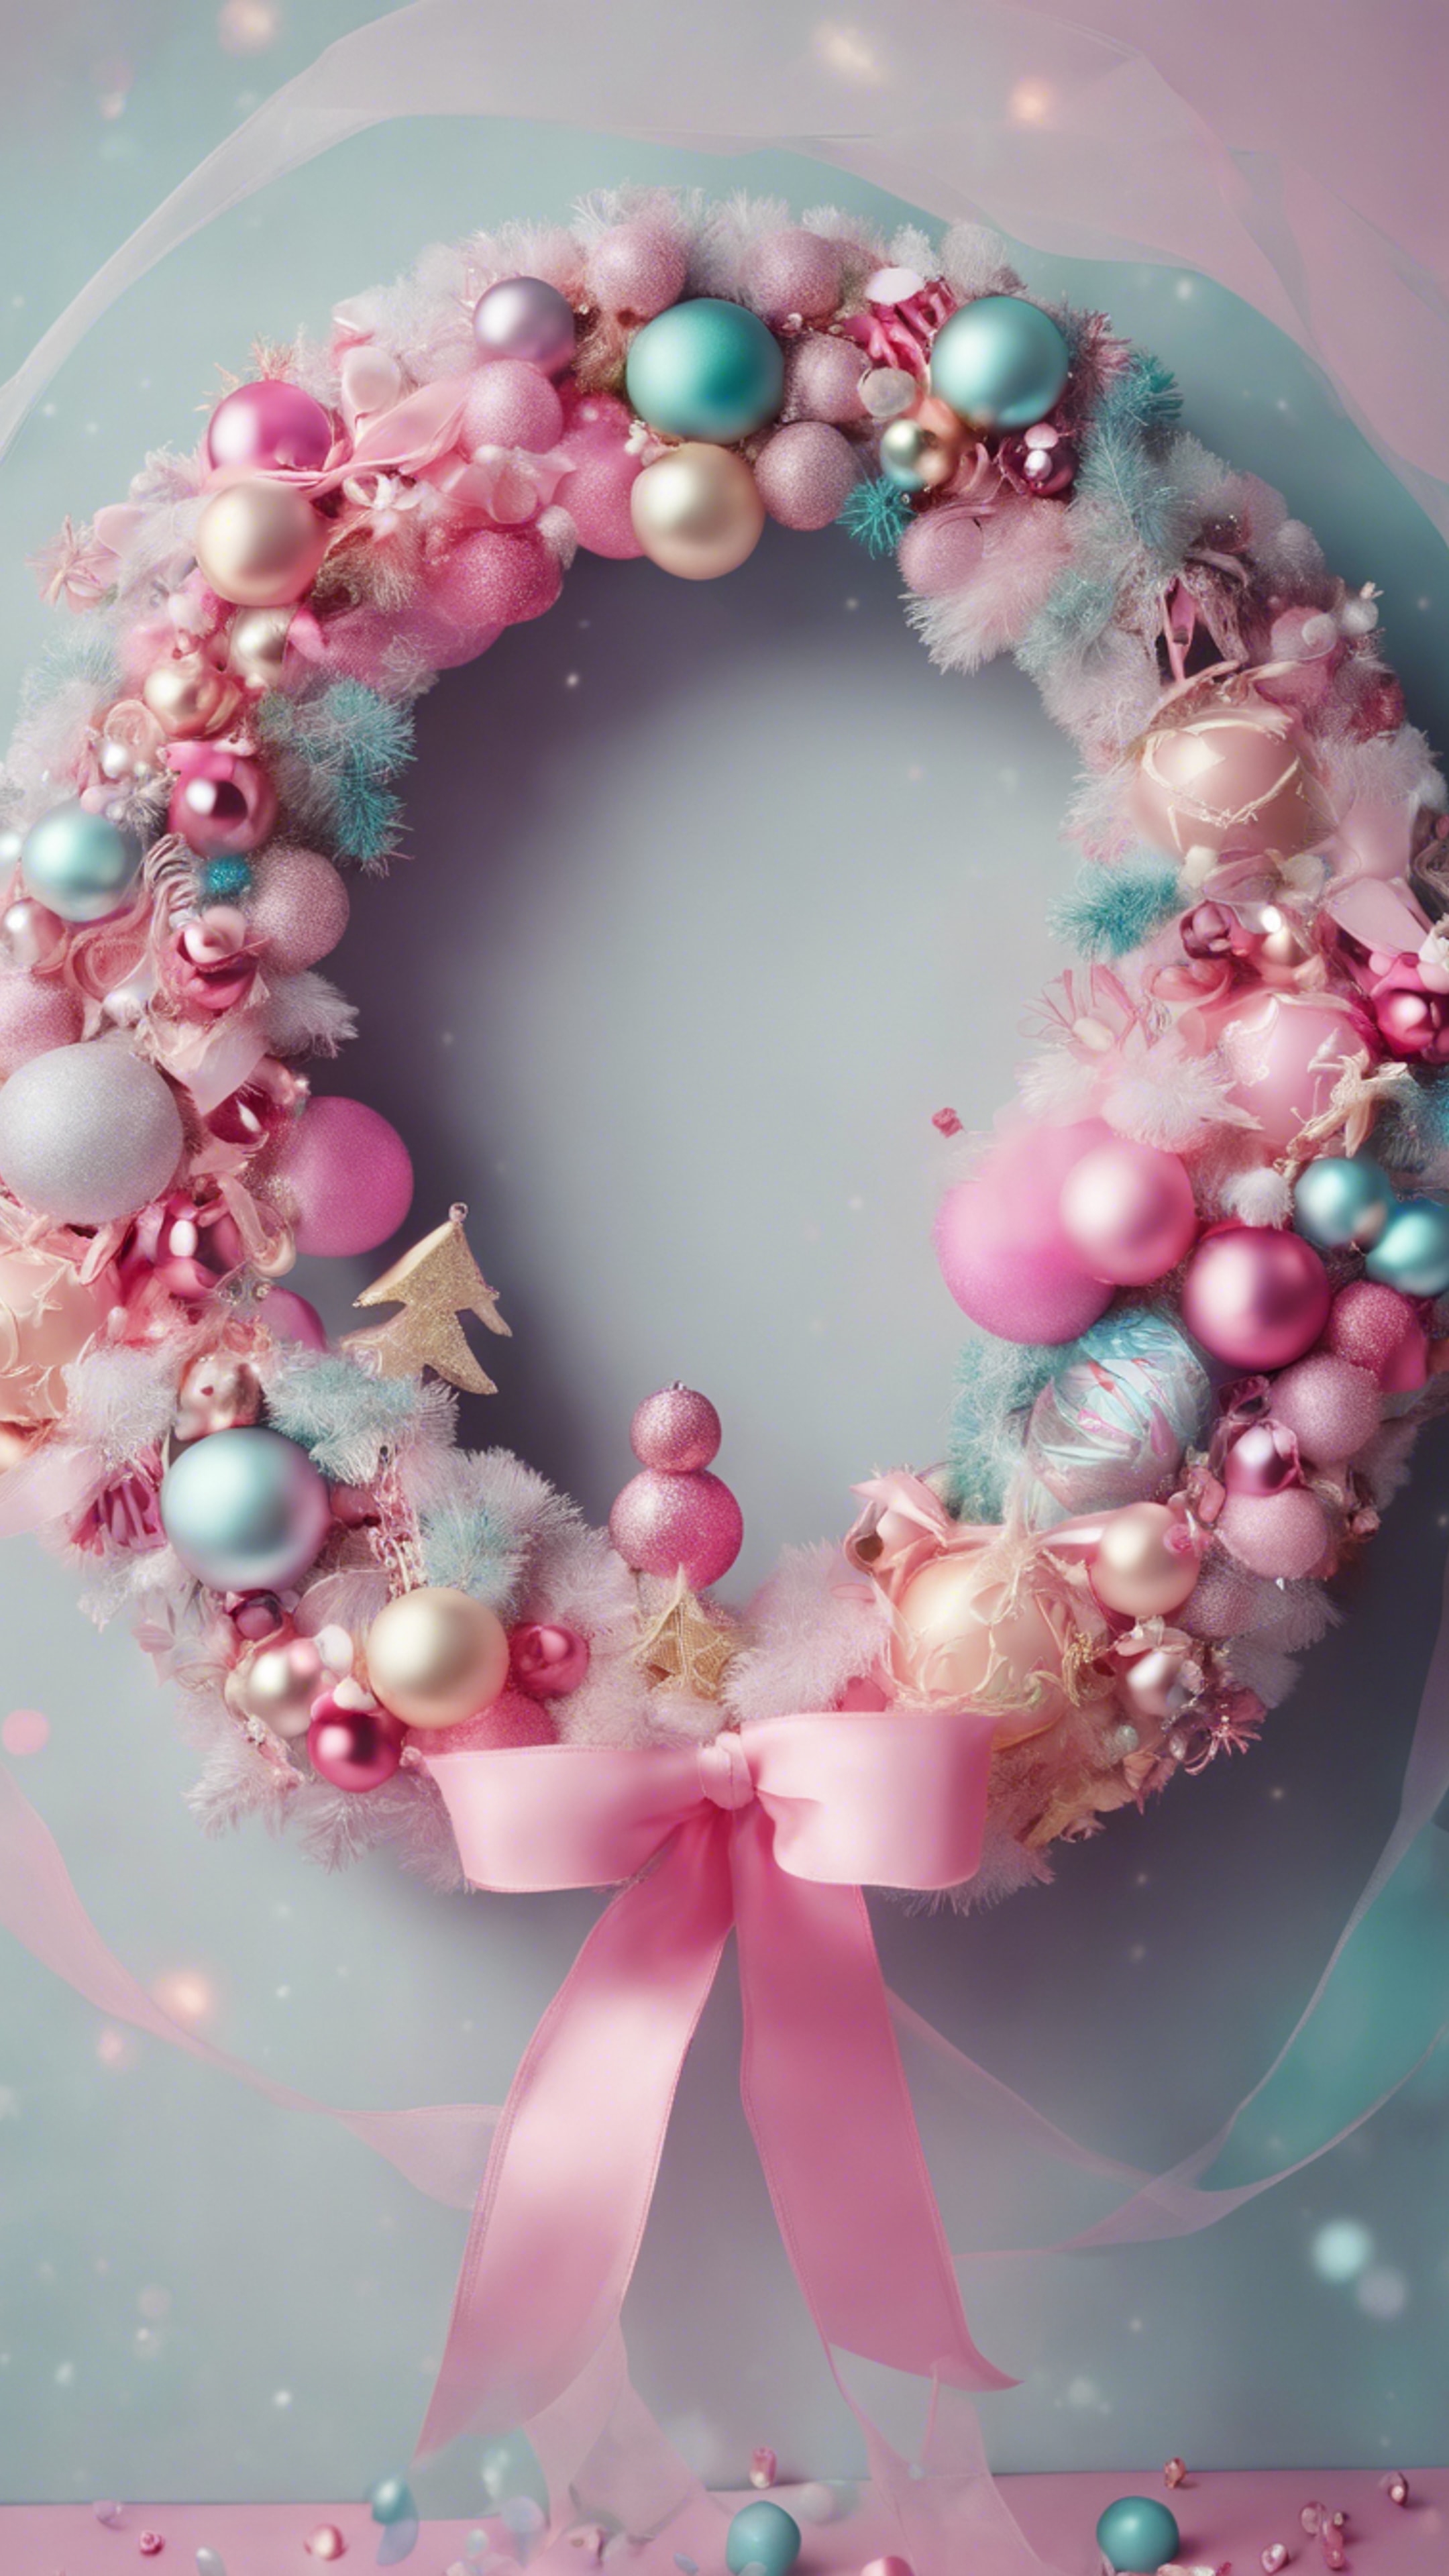 A Kawaii-inspired Christmas wreath adorned with bright pink and pastel ribbons and cute festive ornaments. 벽지[4ef6f99b659d4f218ce6]